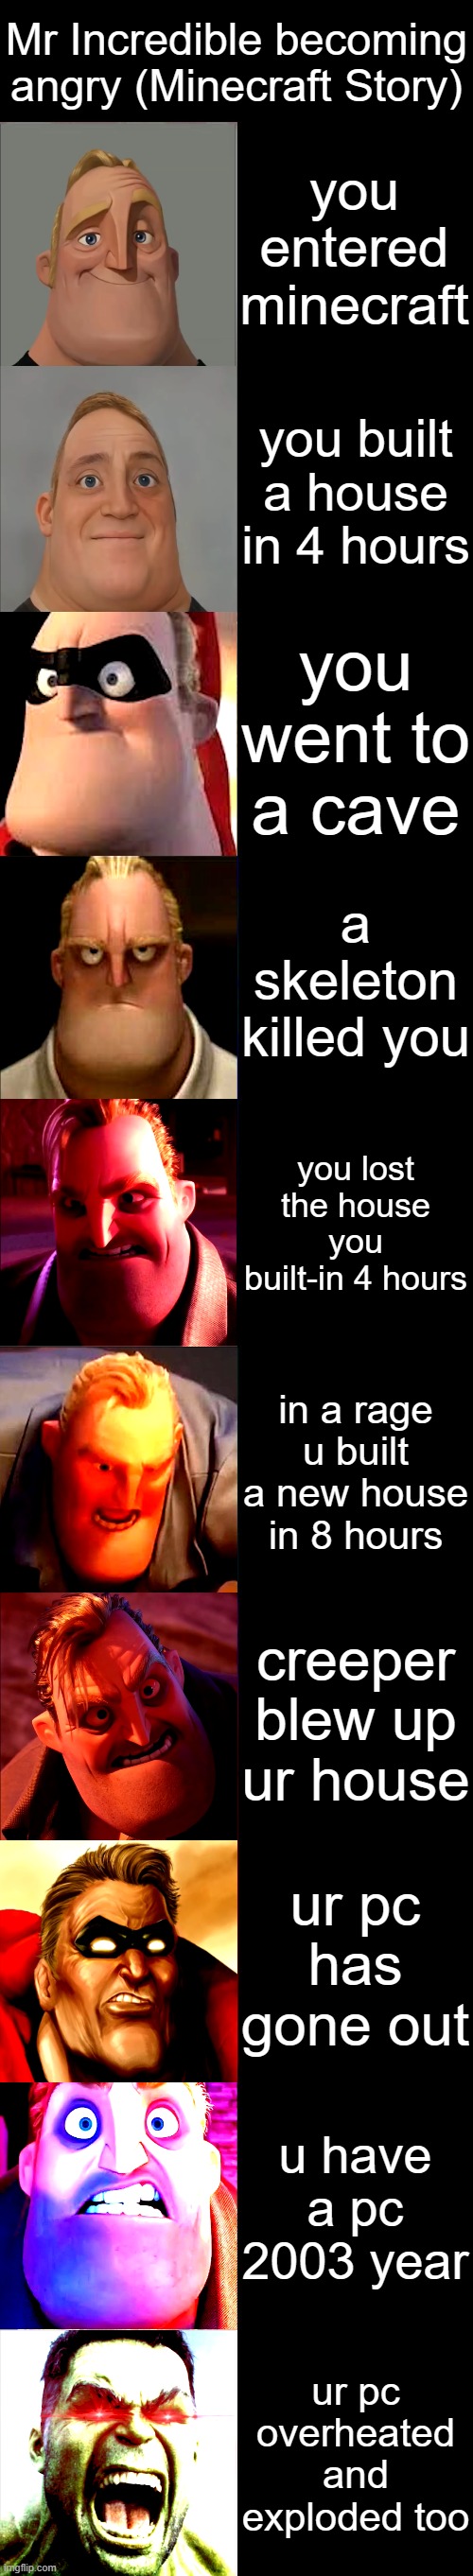 MR INCREDIBLE BECOMING ANGRY MINECRAFT | Mr Incredible becoming angry (Minecraft Story); you entered minecraft; you built a house in 4 hours; you went to a cave; a skeleton killed you; you lost the house you built-in 4 hours; in a rage u built a new house in 8 hours; creeper blew up ur house; ur pc has gone out; u have a pc 2003 year; ur pc overheated and exploded too | image tagged in mr incredible becoming angry | made w/ Imgflip meme maker